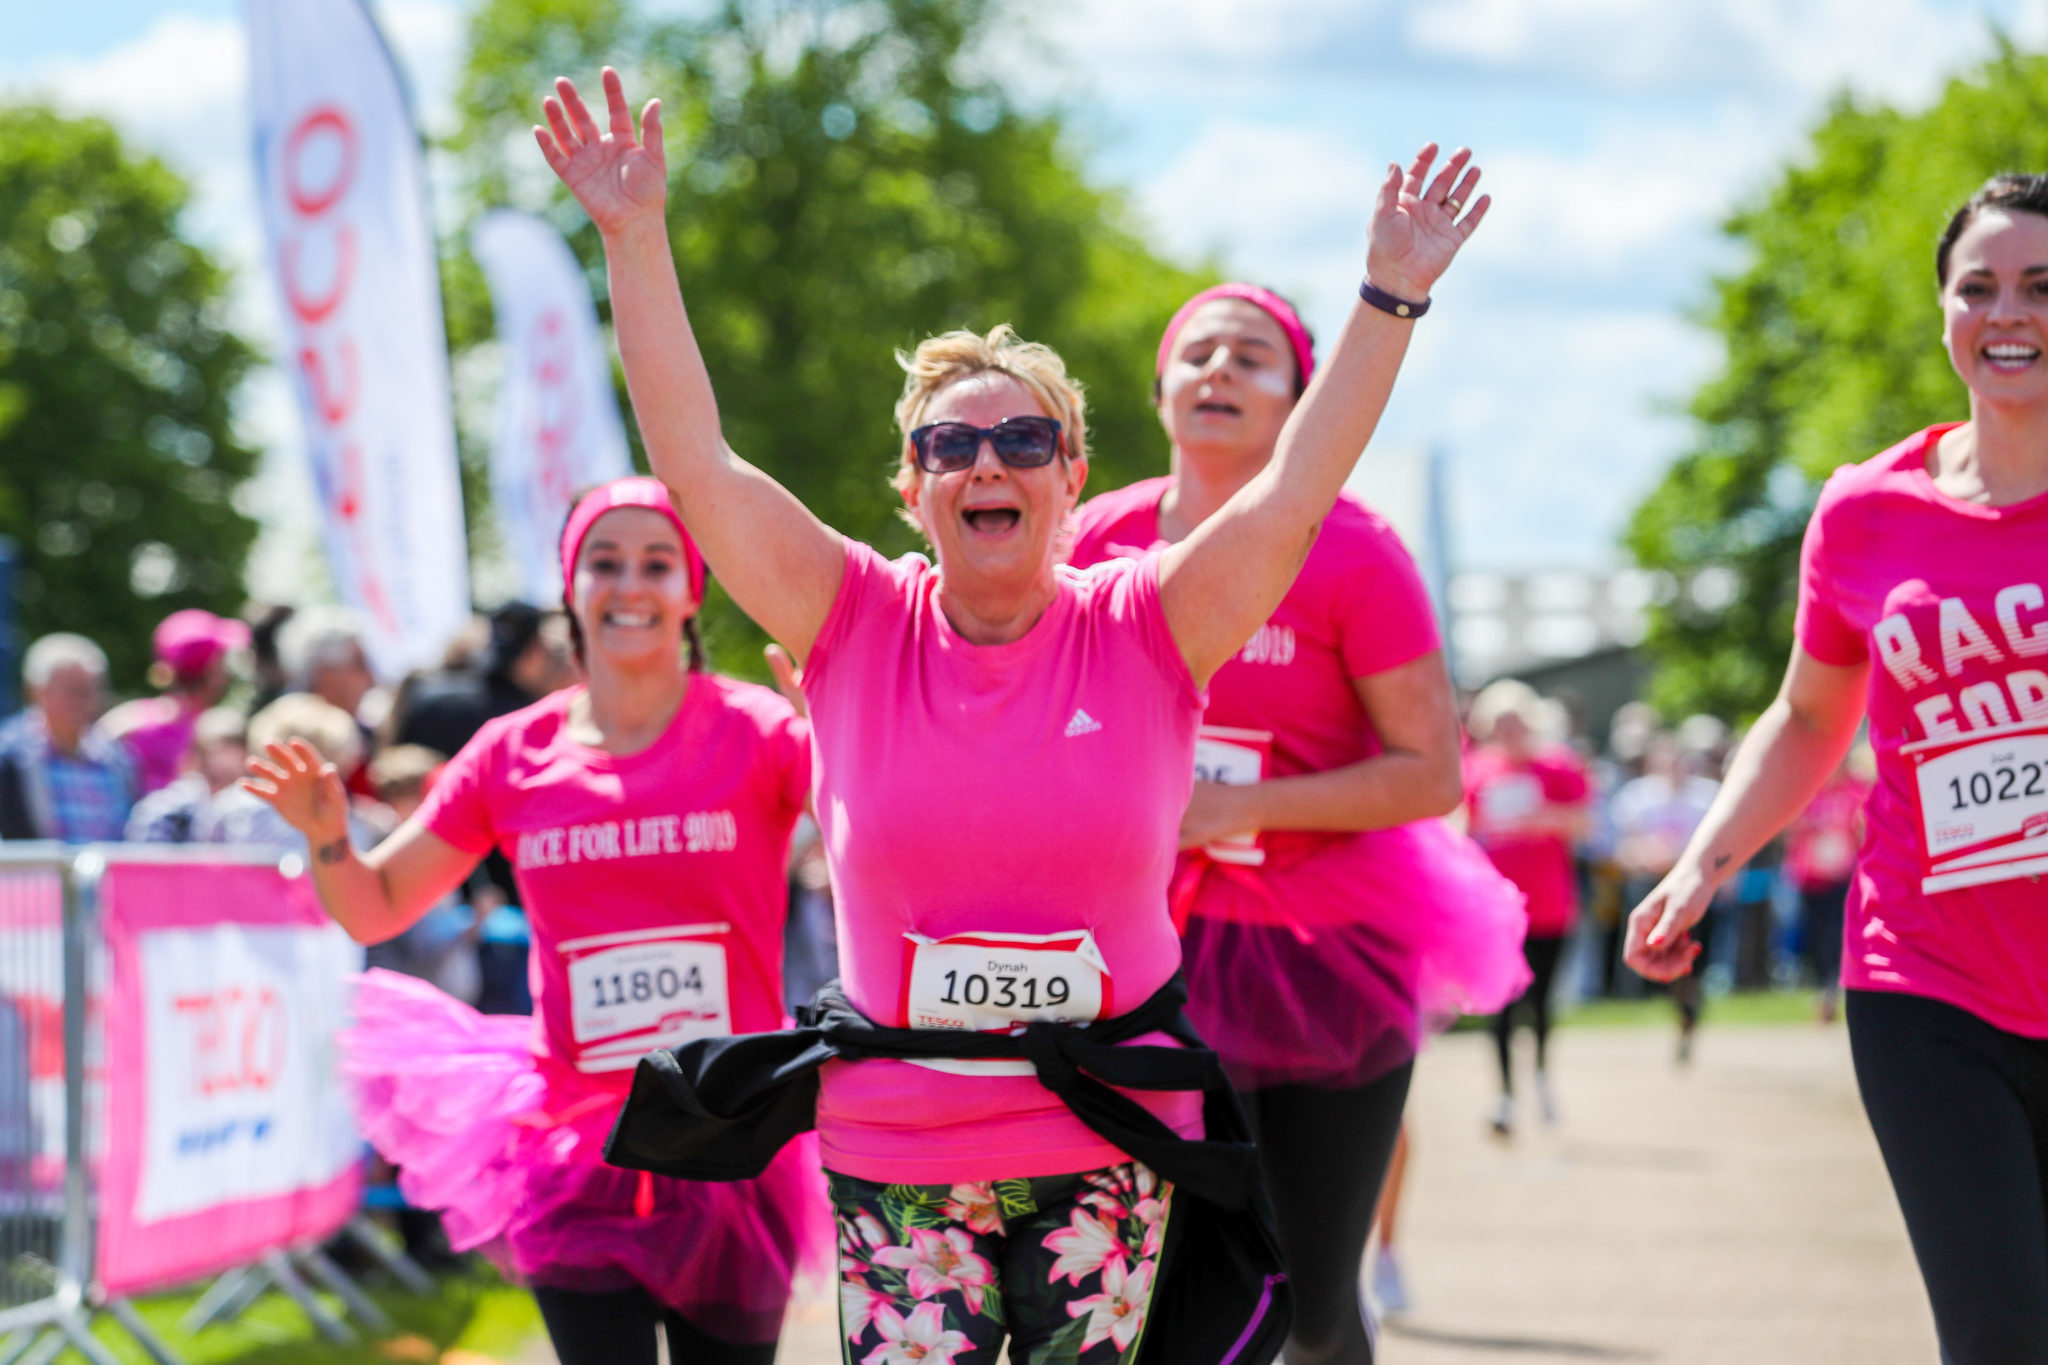 A running in pink finishes a race